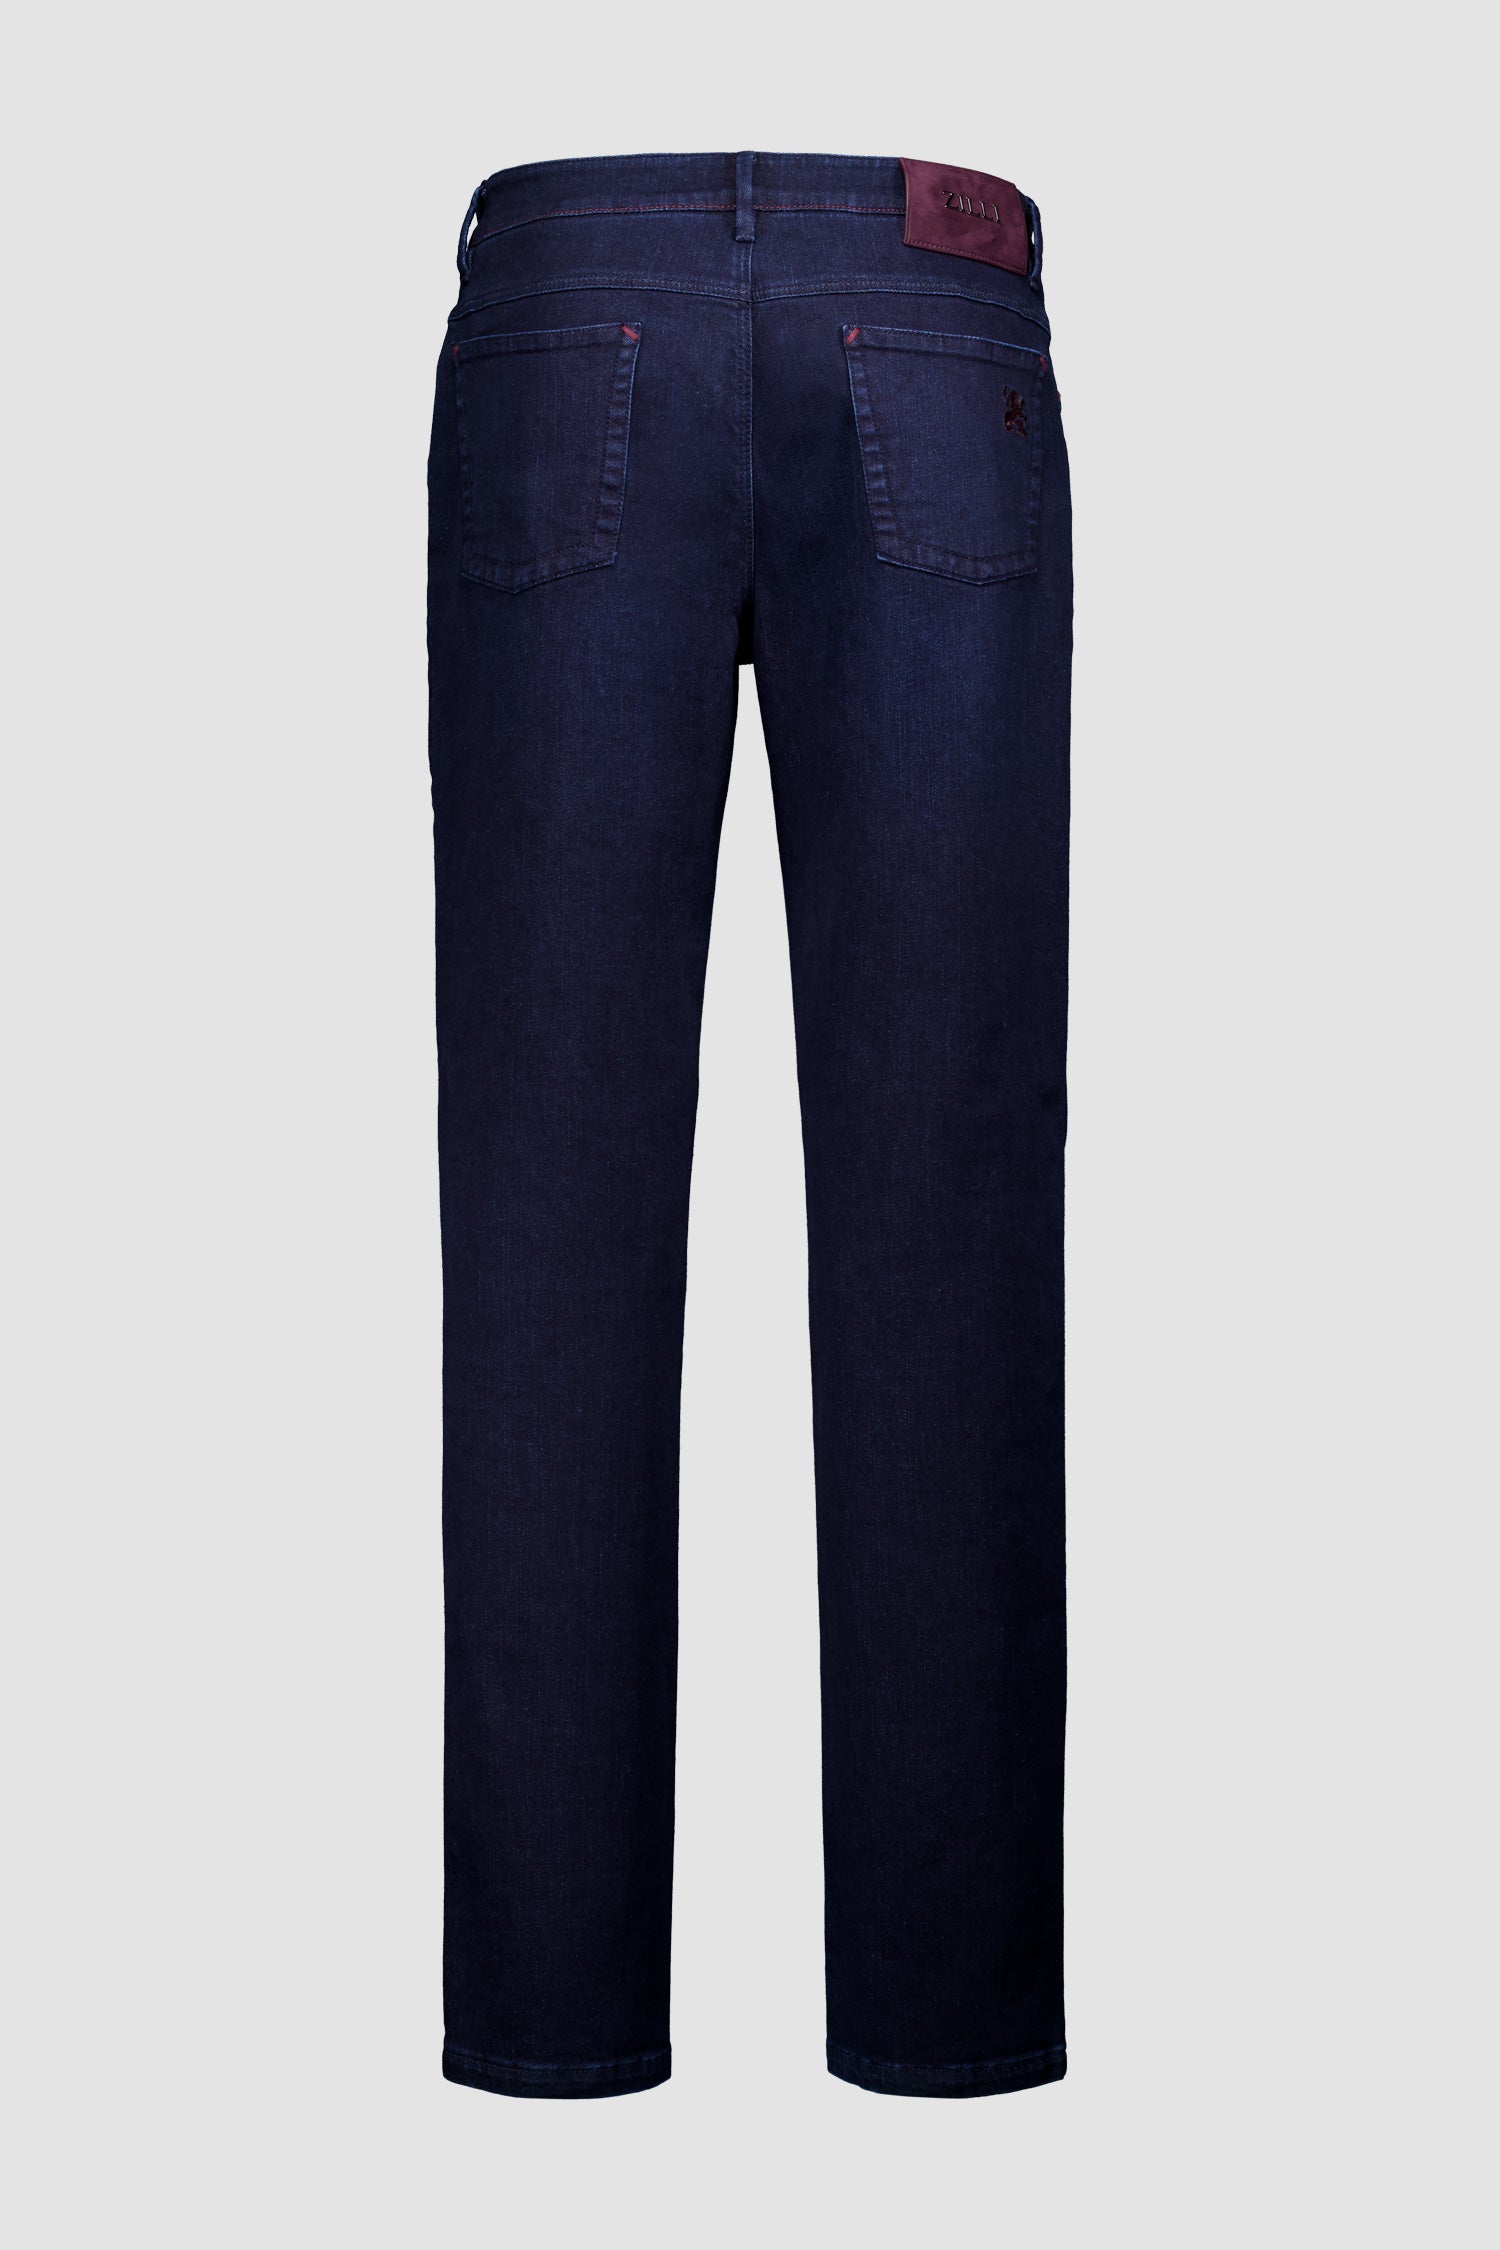 Zilli Micro Griffon Embroidered Regular Jeans